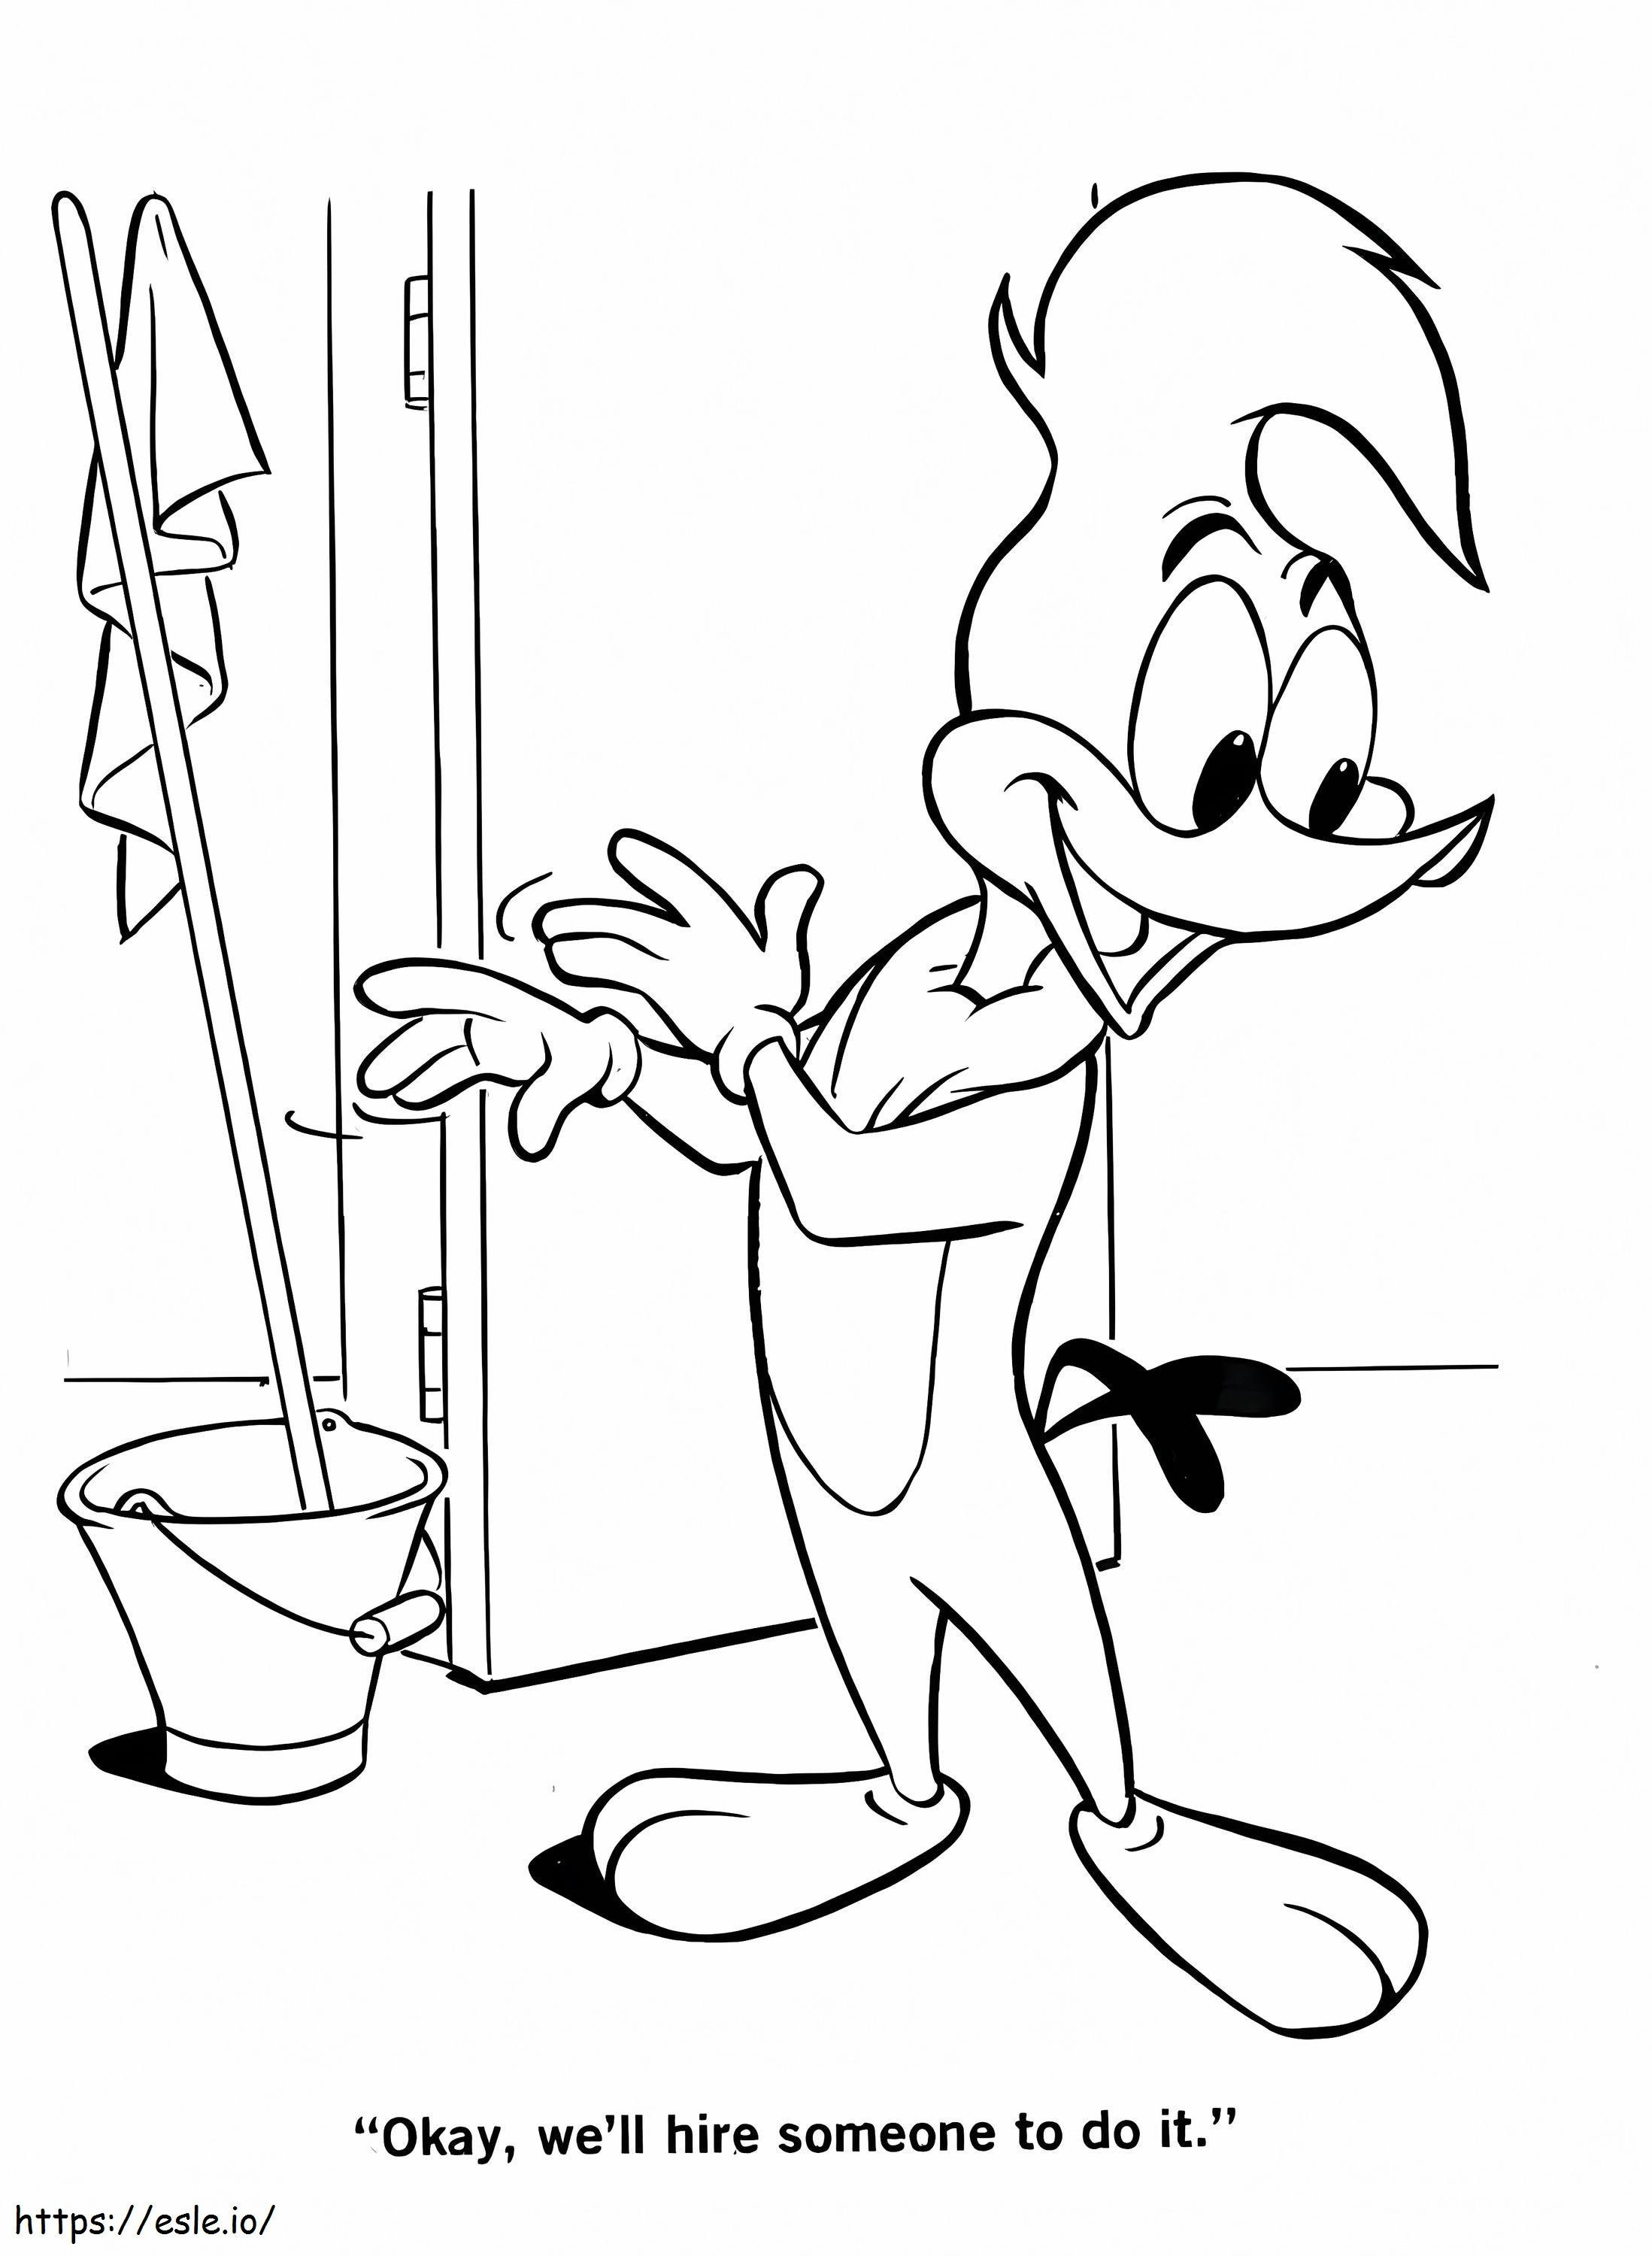 Woody Woodpecker Cleaning House coloring page